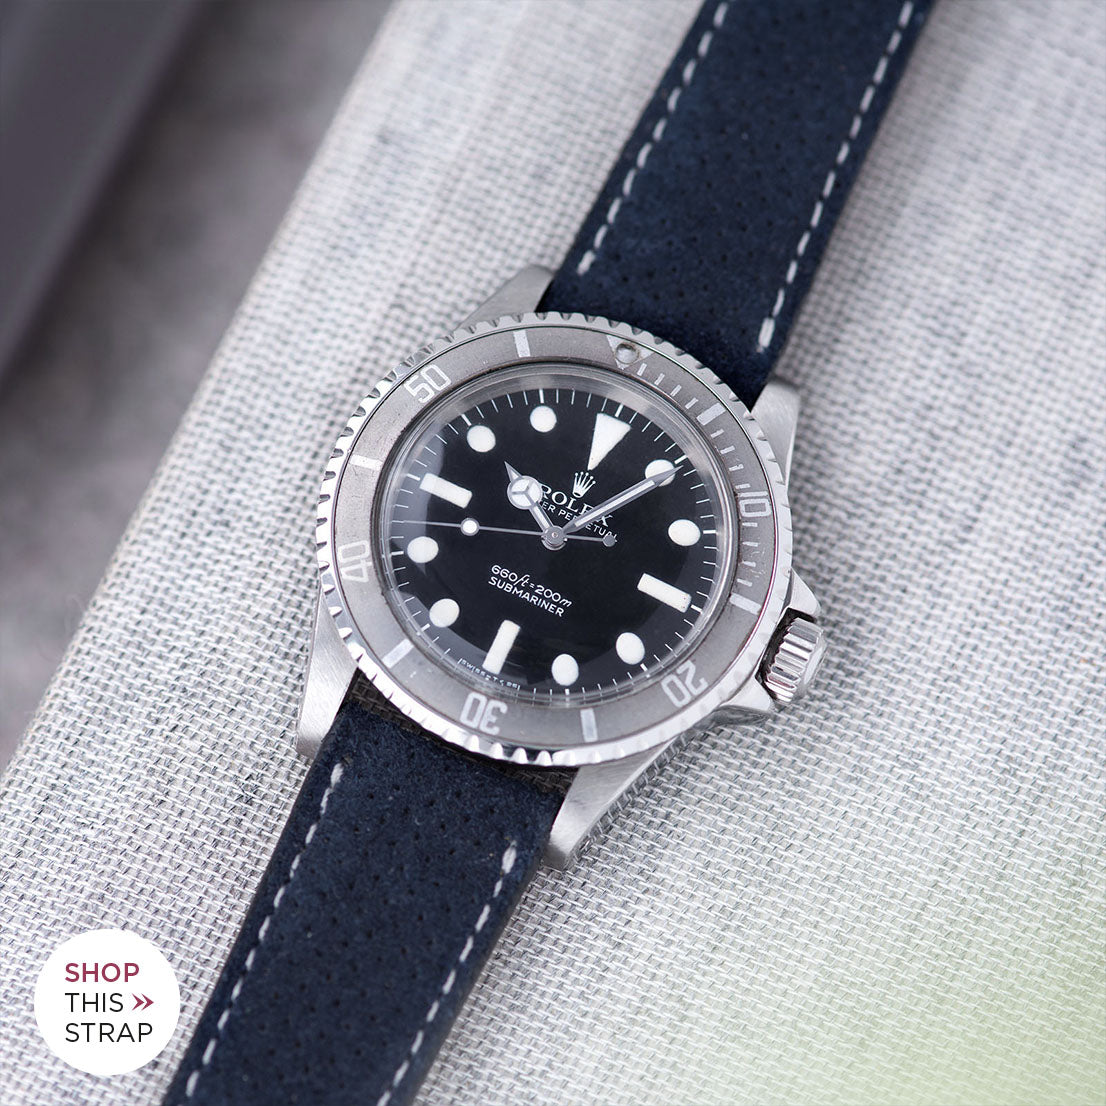 Bulang and Sons_Strap Guide_The Rolex 5513 Faded Maxi Submariner_Punched Blue Silky Suede Leather Watch Strap